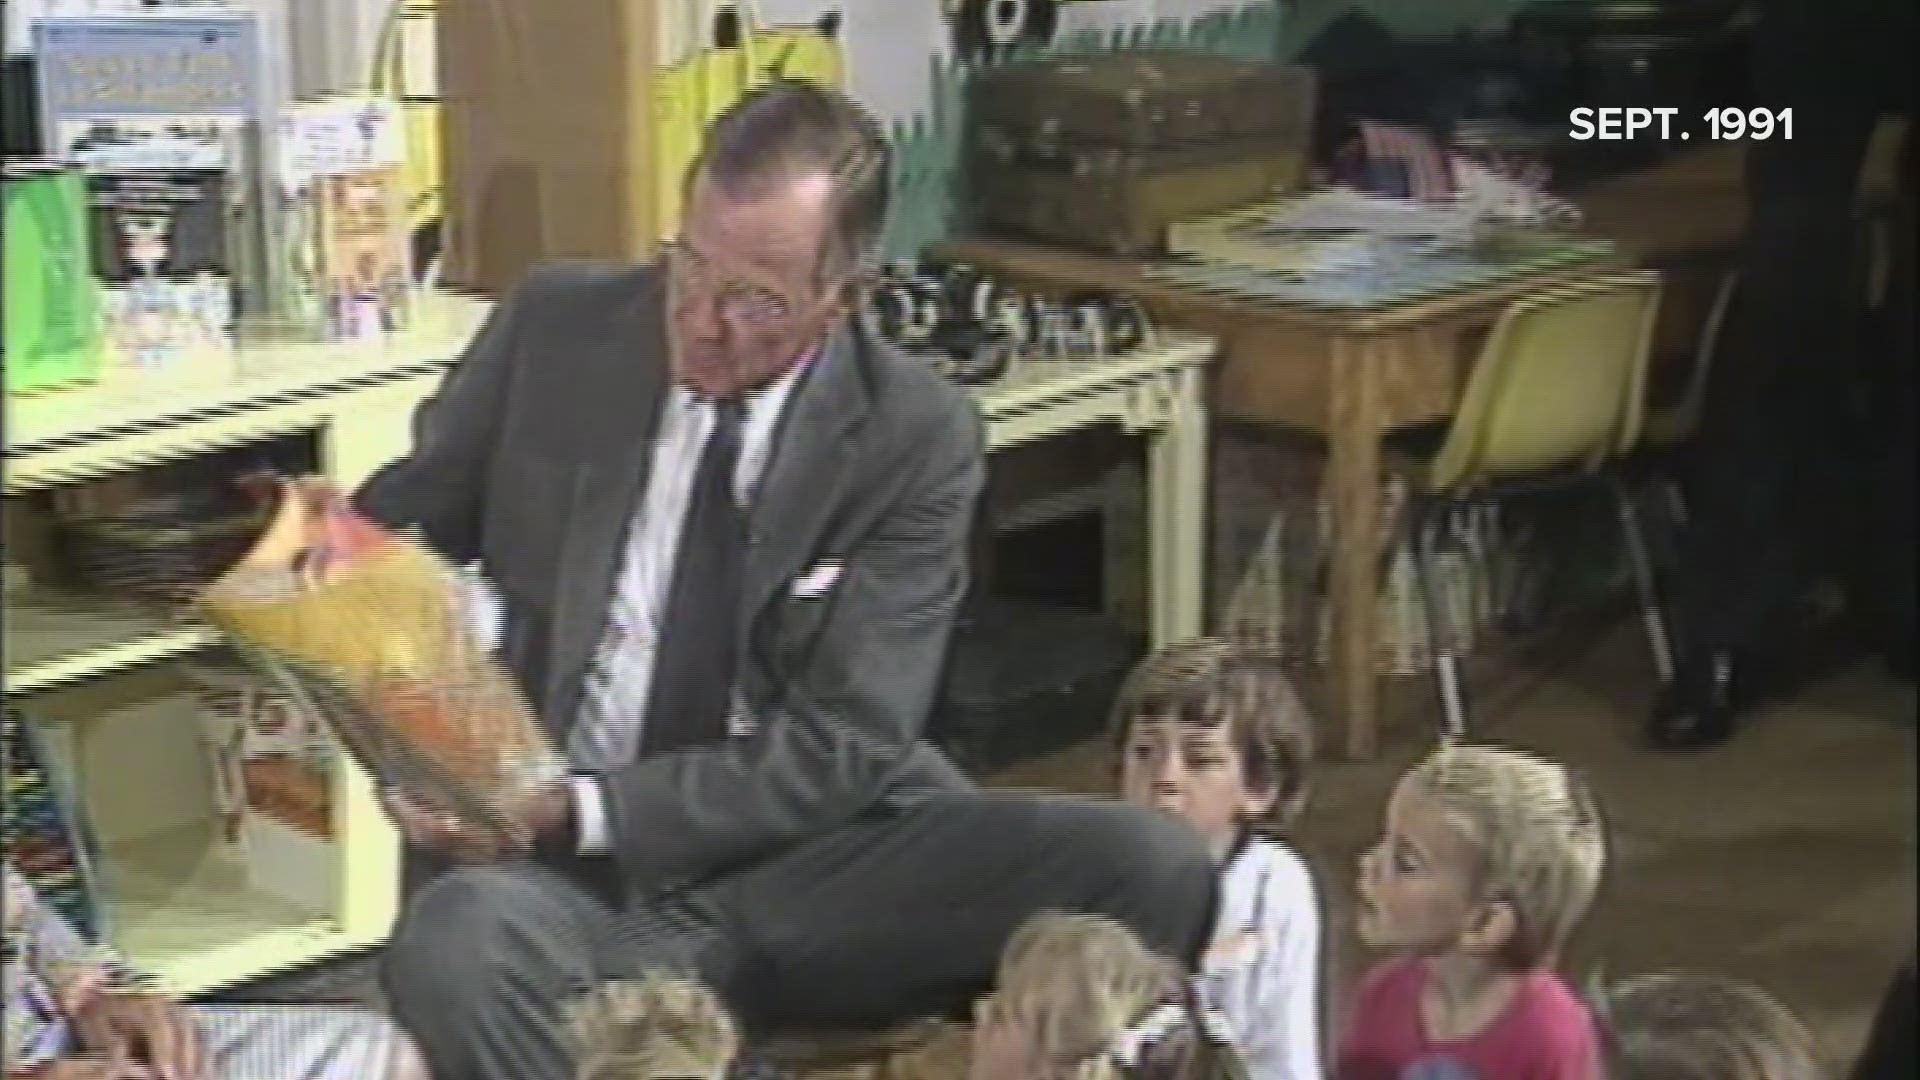 Kindergarteners listened in rapt attention as Pres. George H.W. Bush read "The Big Hungry Bear" on the first day of class at Farwell Elementary School in Lewiston on Sept. 3, 1991.